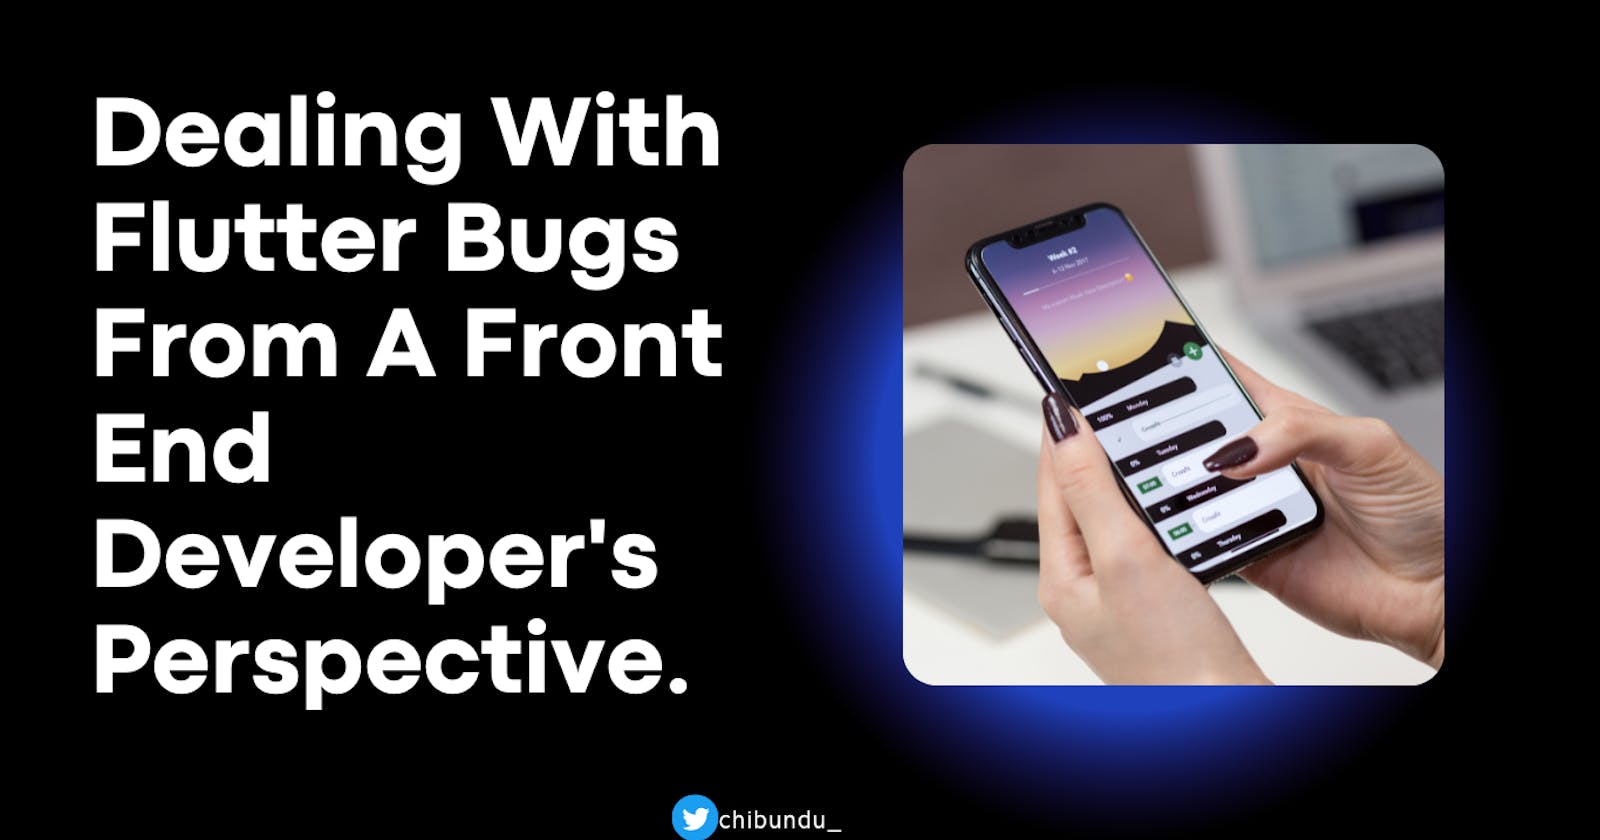 Dealing With Flutter Bugs From A Front End Developer's Perspective.